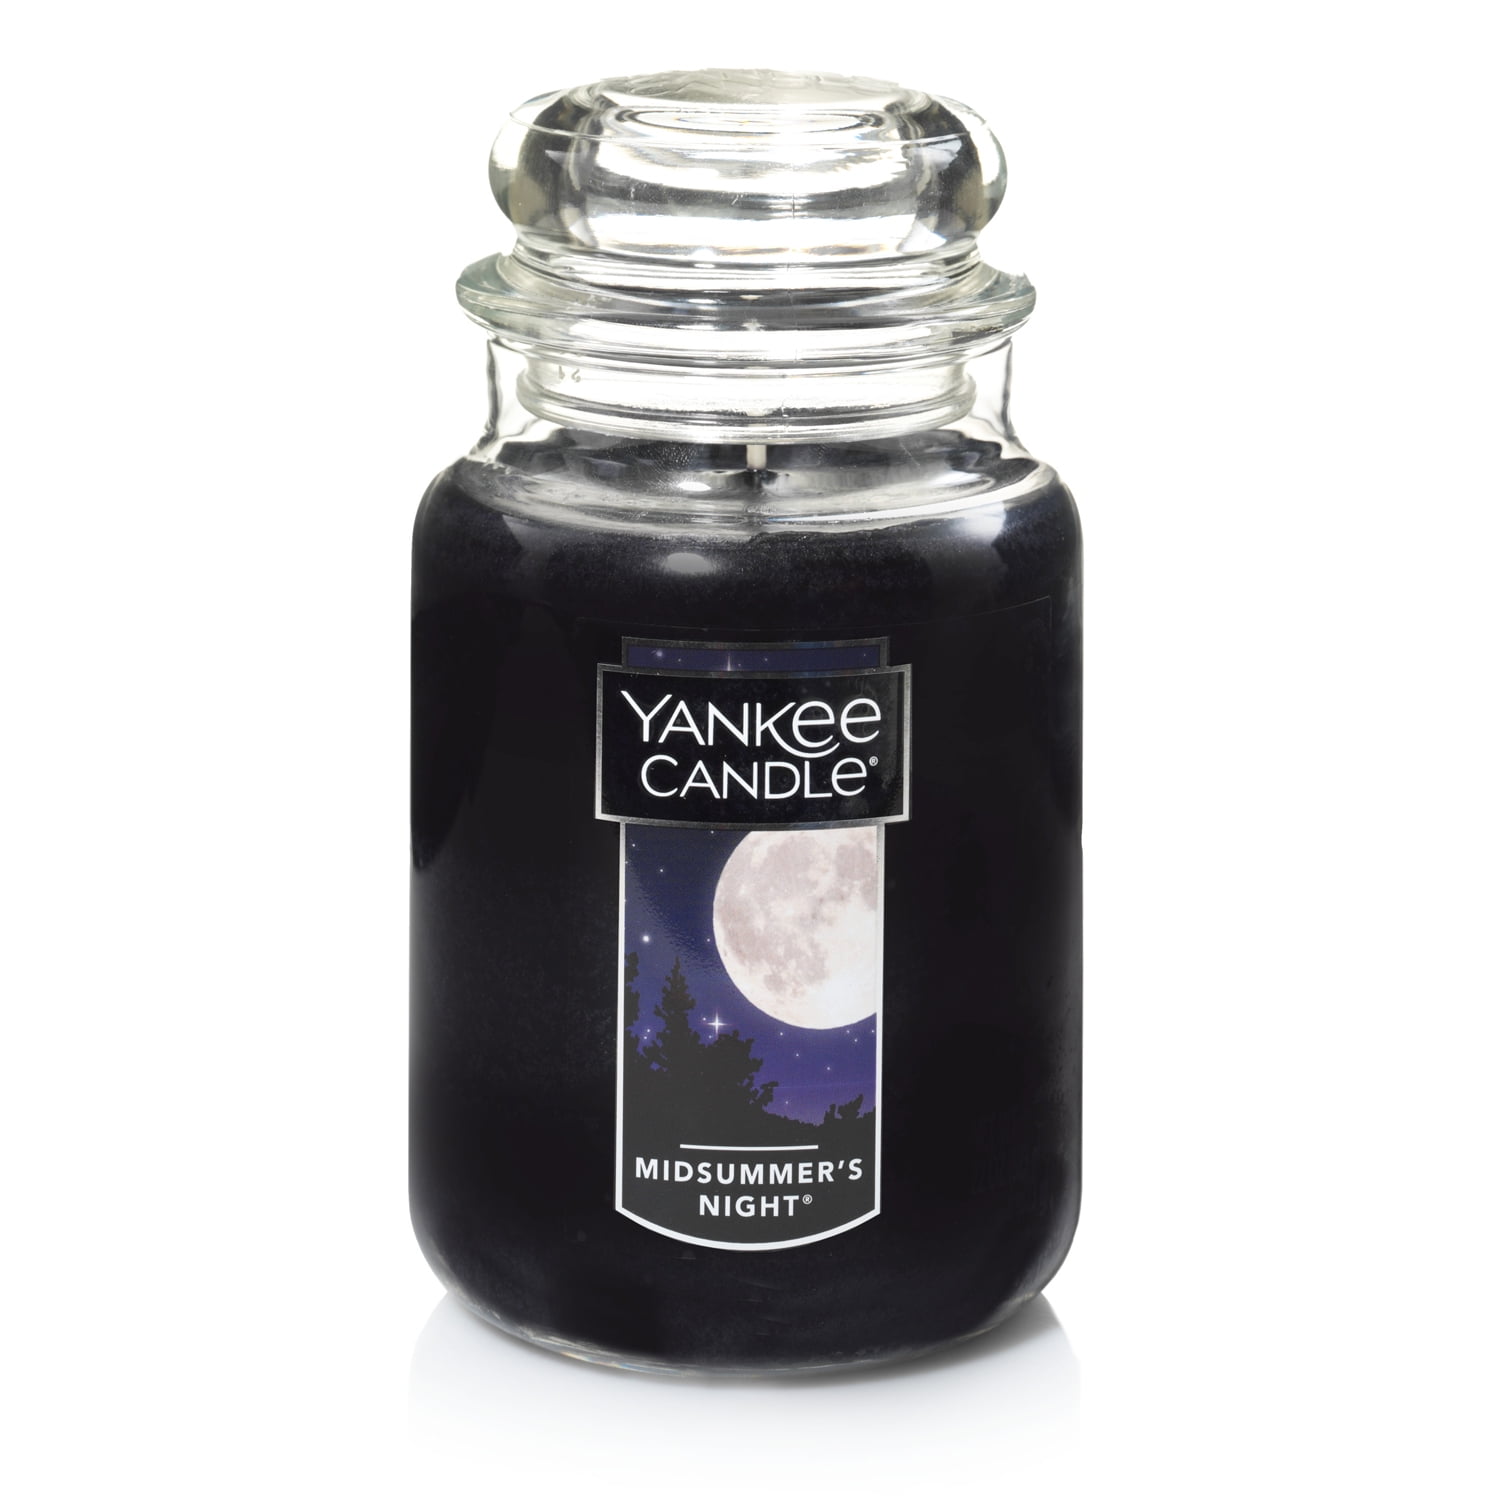 Yankee Candle Candle, Midsummer's Night - 1 candle, 22 oz